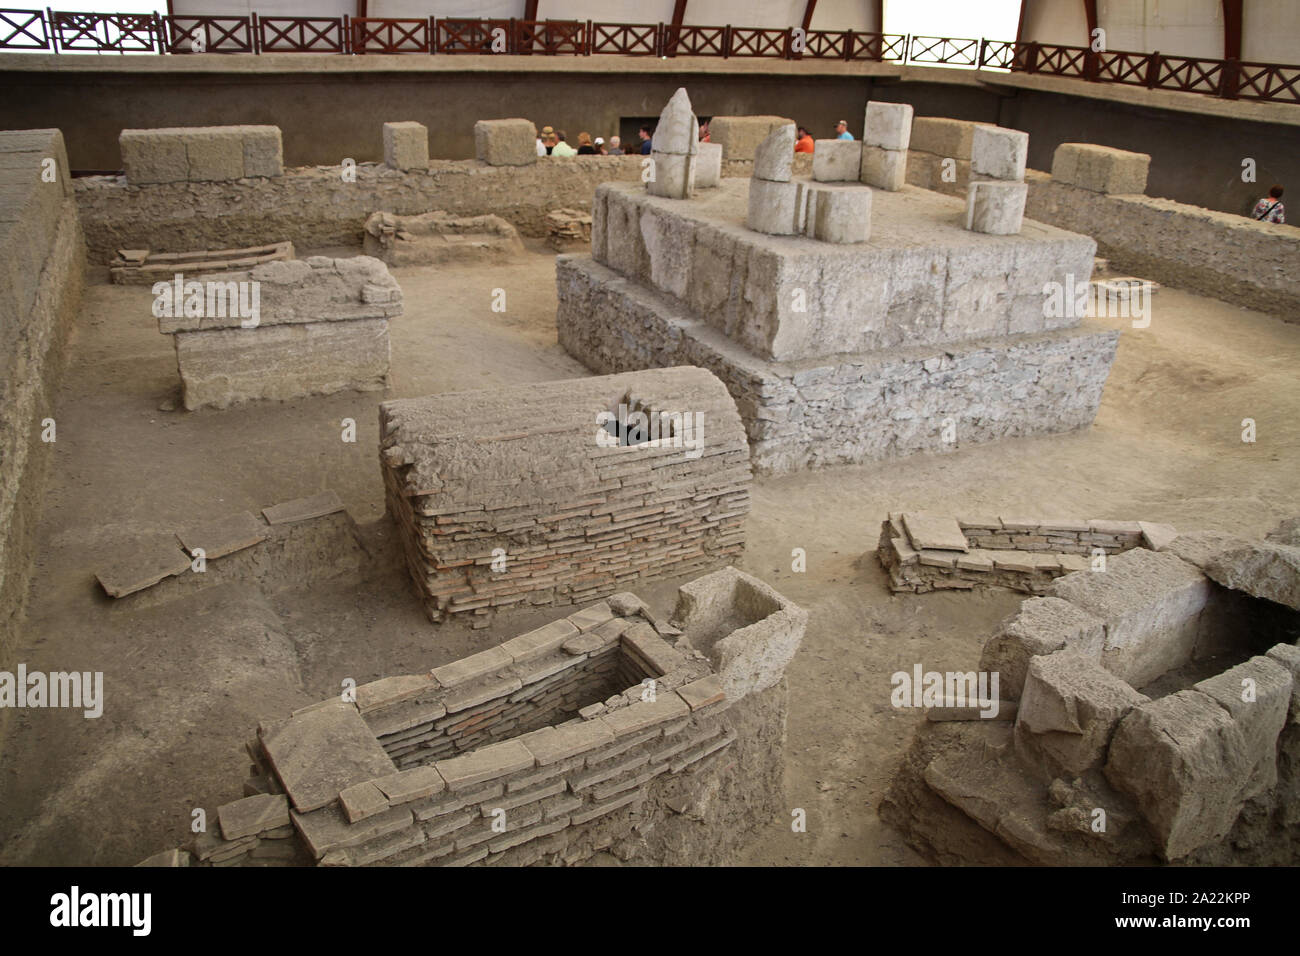 View of Ancient Roman tombs and ruins at the Viminacium or Viminatium around the interior centre, an Ancient Roman military camp in the old Roman province of Moesia (today's Serbia), Kostolac, Branichevo District, Serbia. Stock Photo